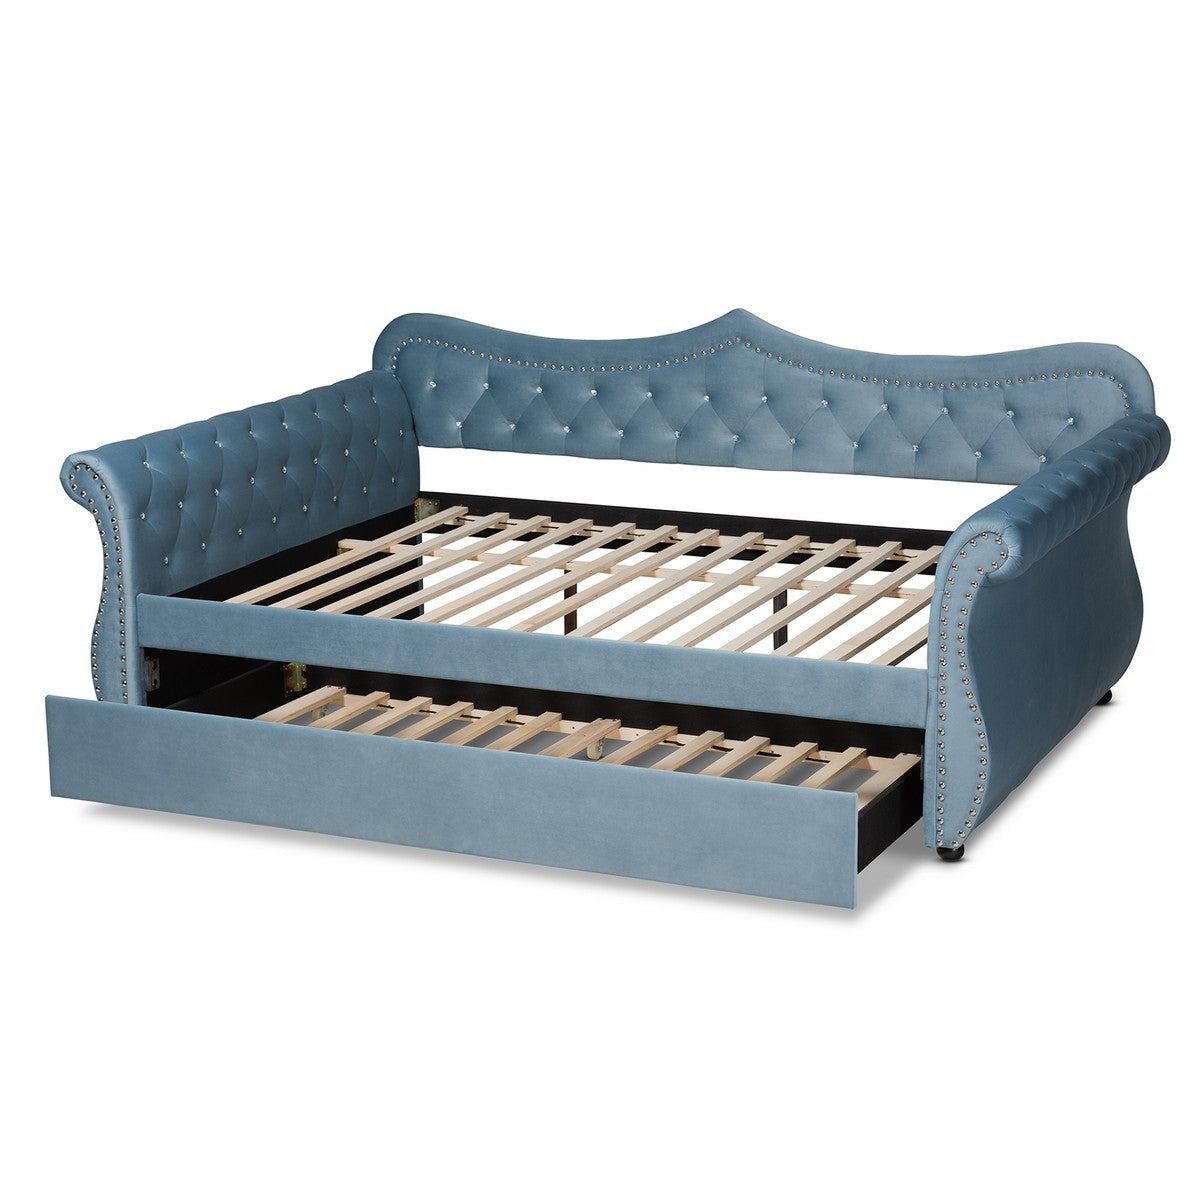 Baxton Studio Abbie Traditional and Transitional Light Blue Velvet Fabric Upholstered and Crystal Tufted Queen Size Daybed with Trundle